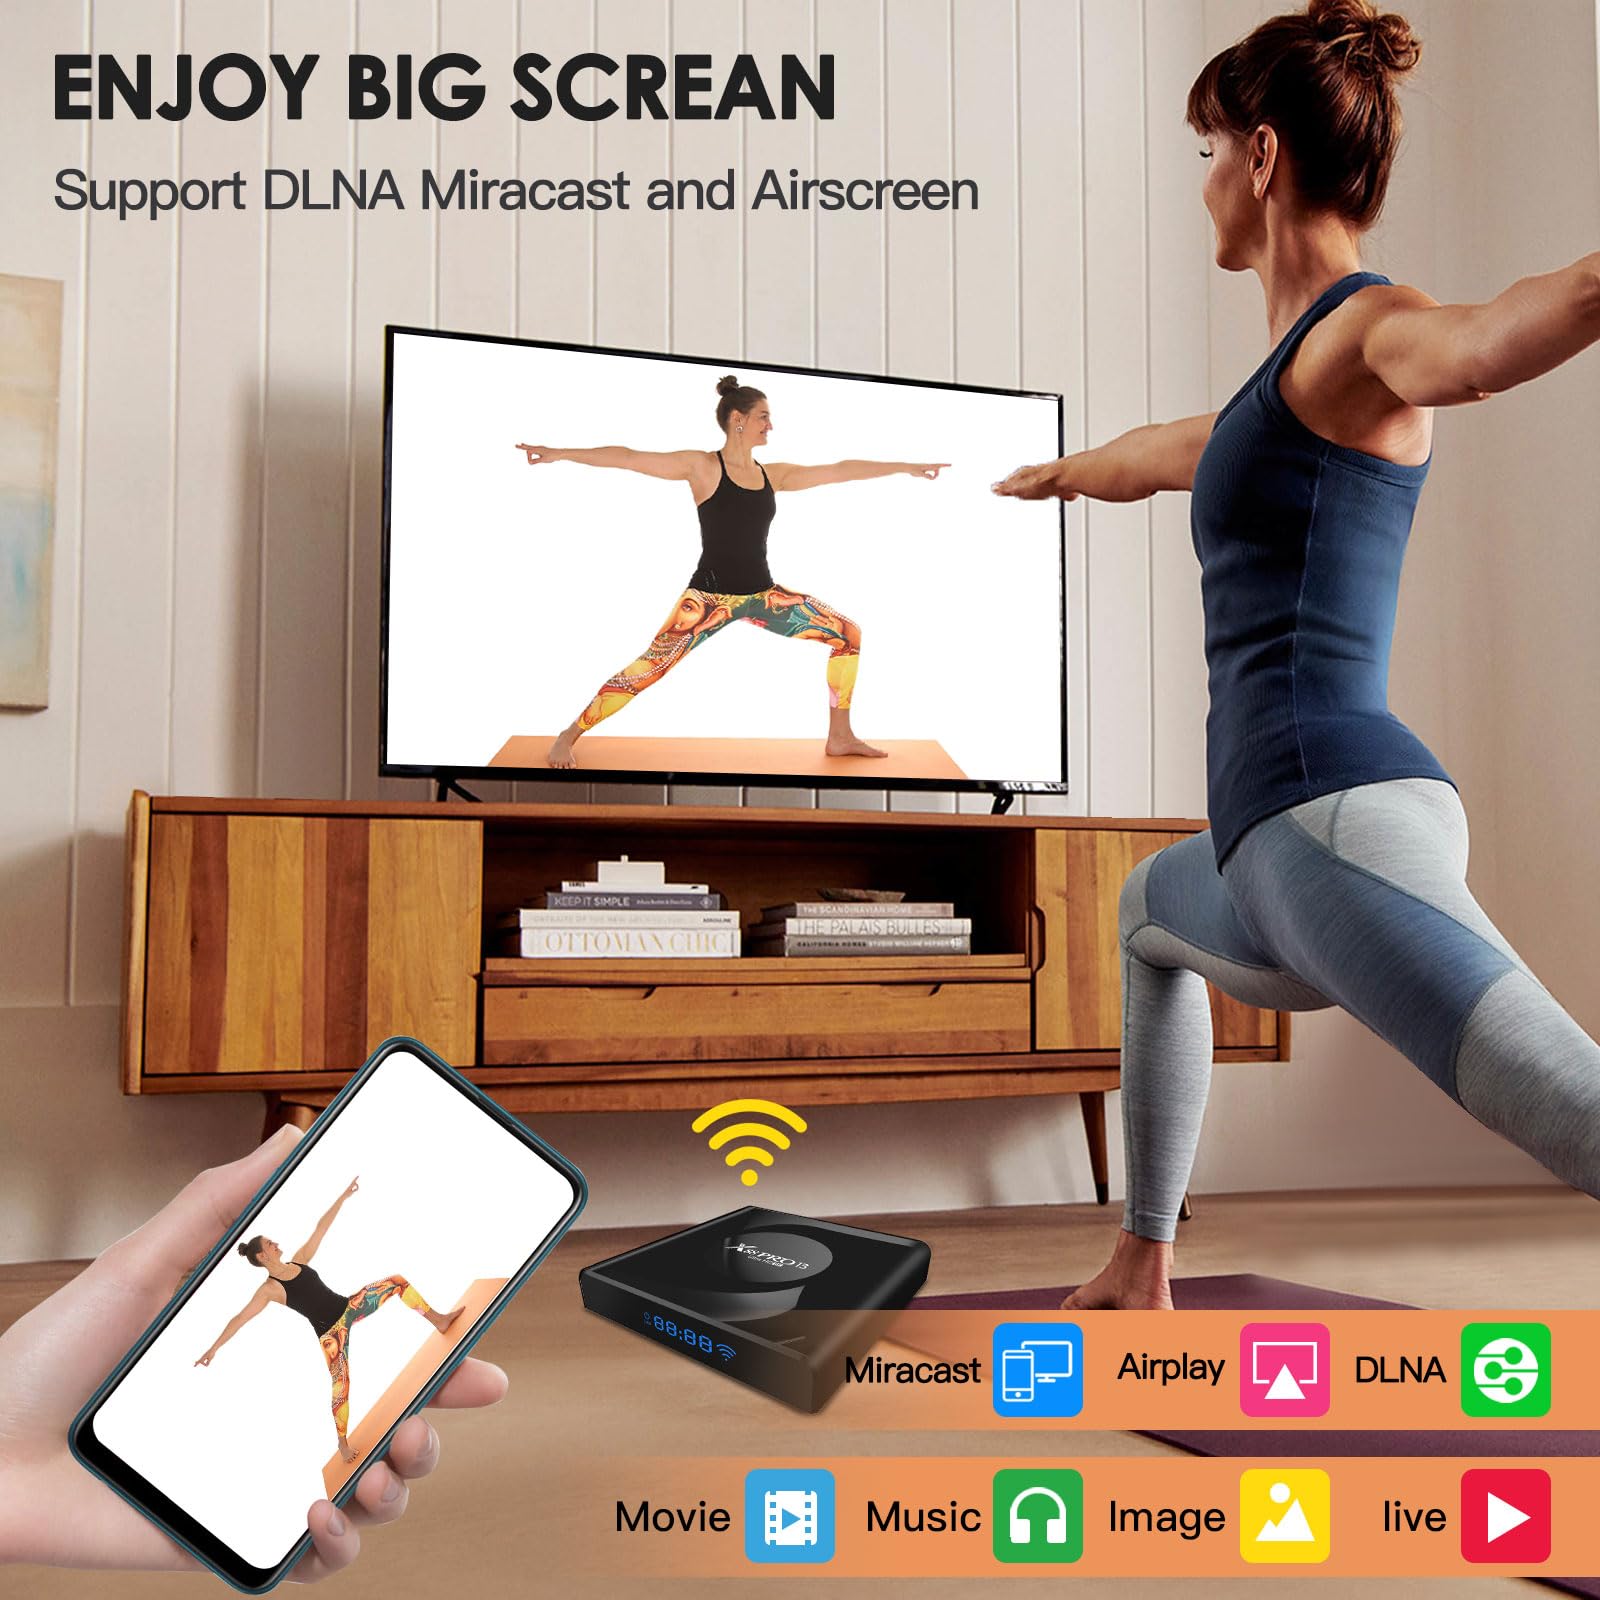 Upvivi TV Box Android 13.0 4GB 32GB Built-in RK3528 Quadcore 64bit with 5G WiFi6 Bluetooth5.0 USB3.0,Android TV Box Supports 4K8K HDR 3D H.265 Android Box with Wireless Mini Backlight Keyboard